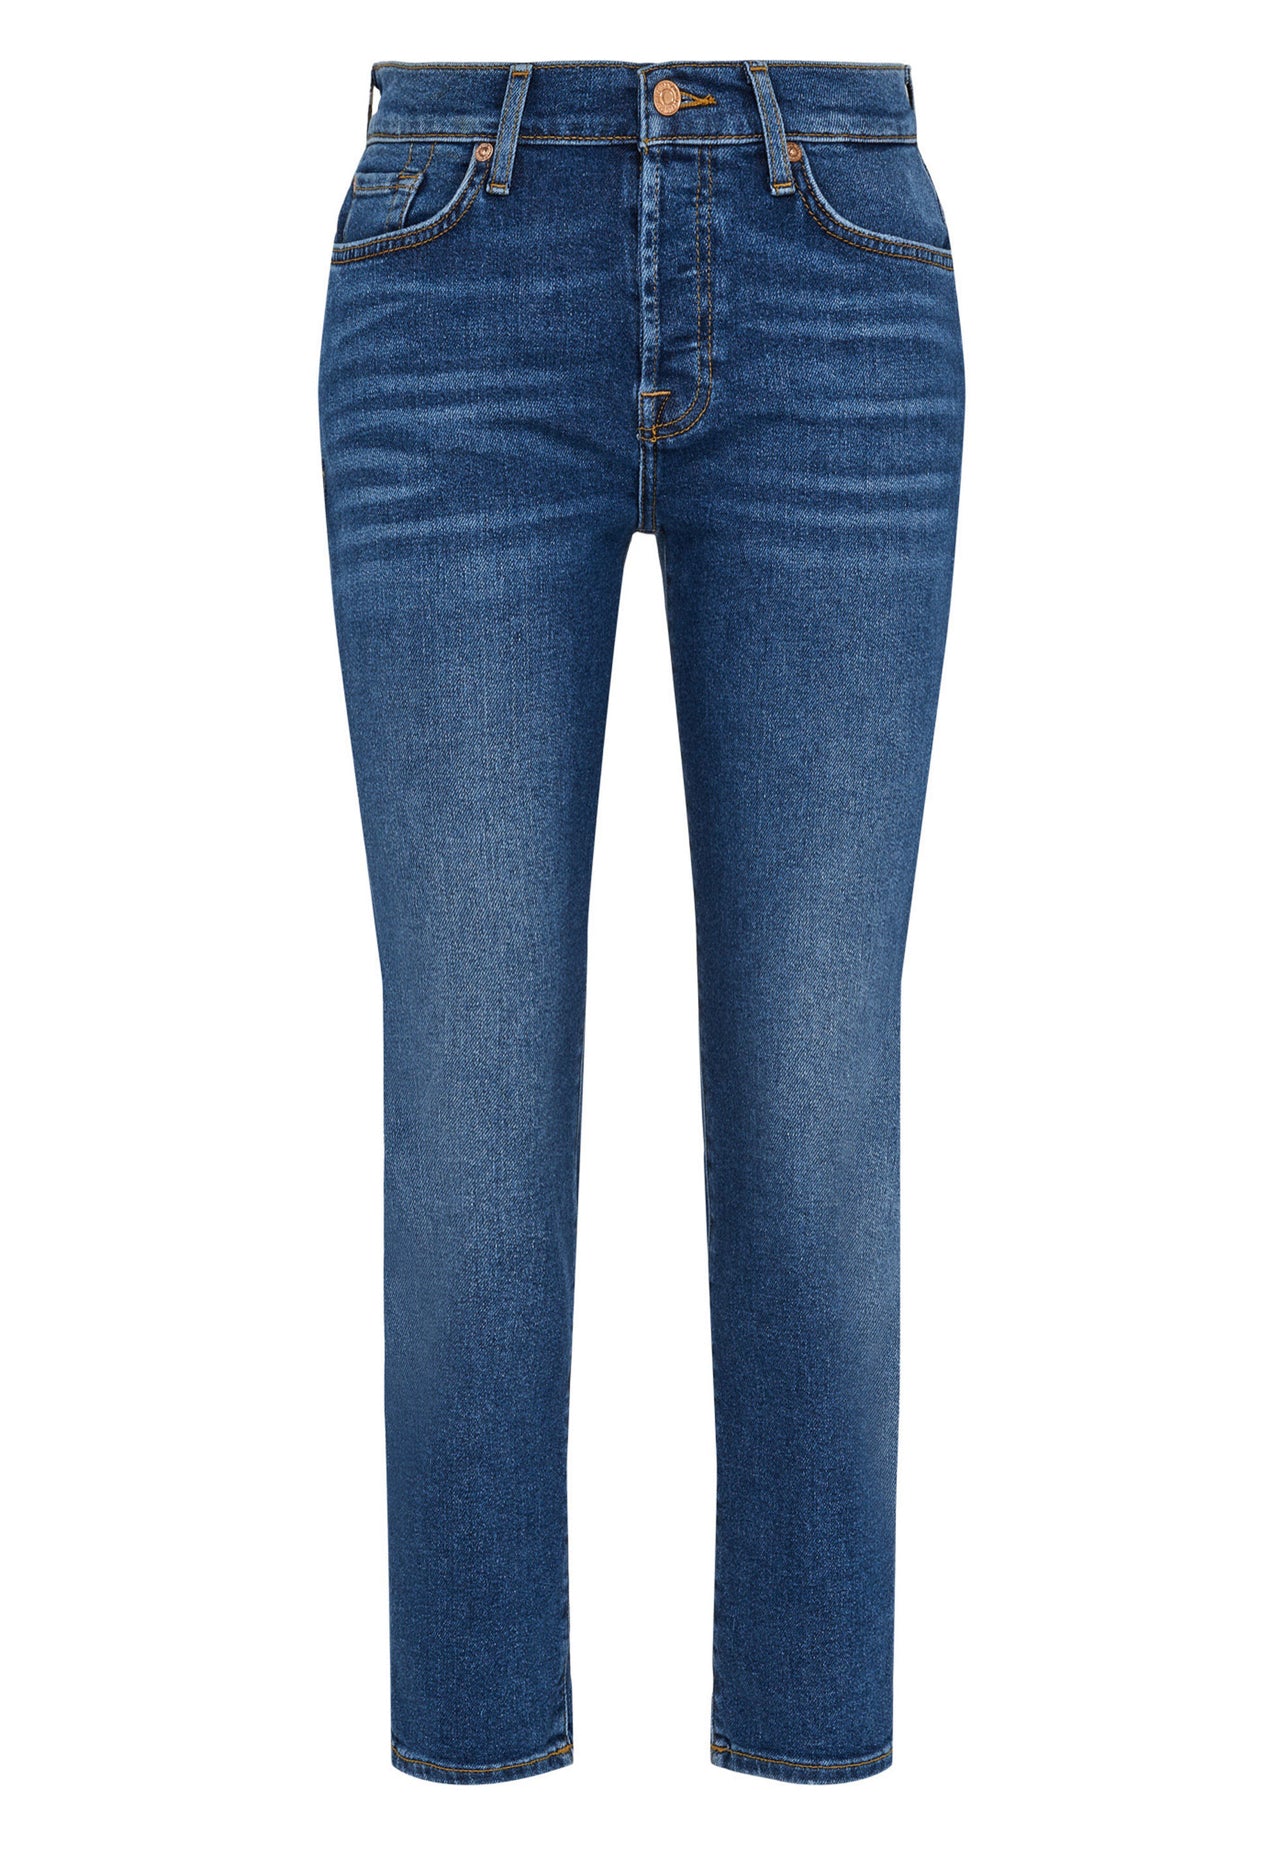 7 for all mankind - Jeans Josefina Luxe Vintage